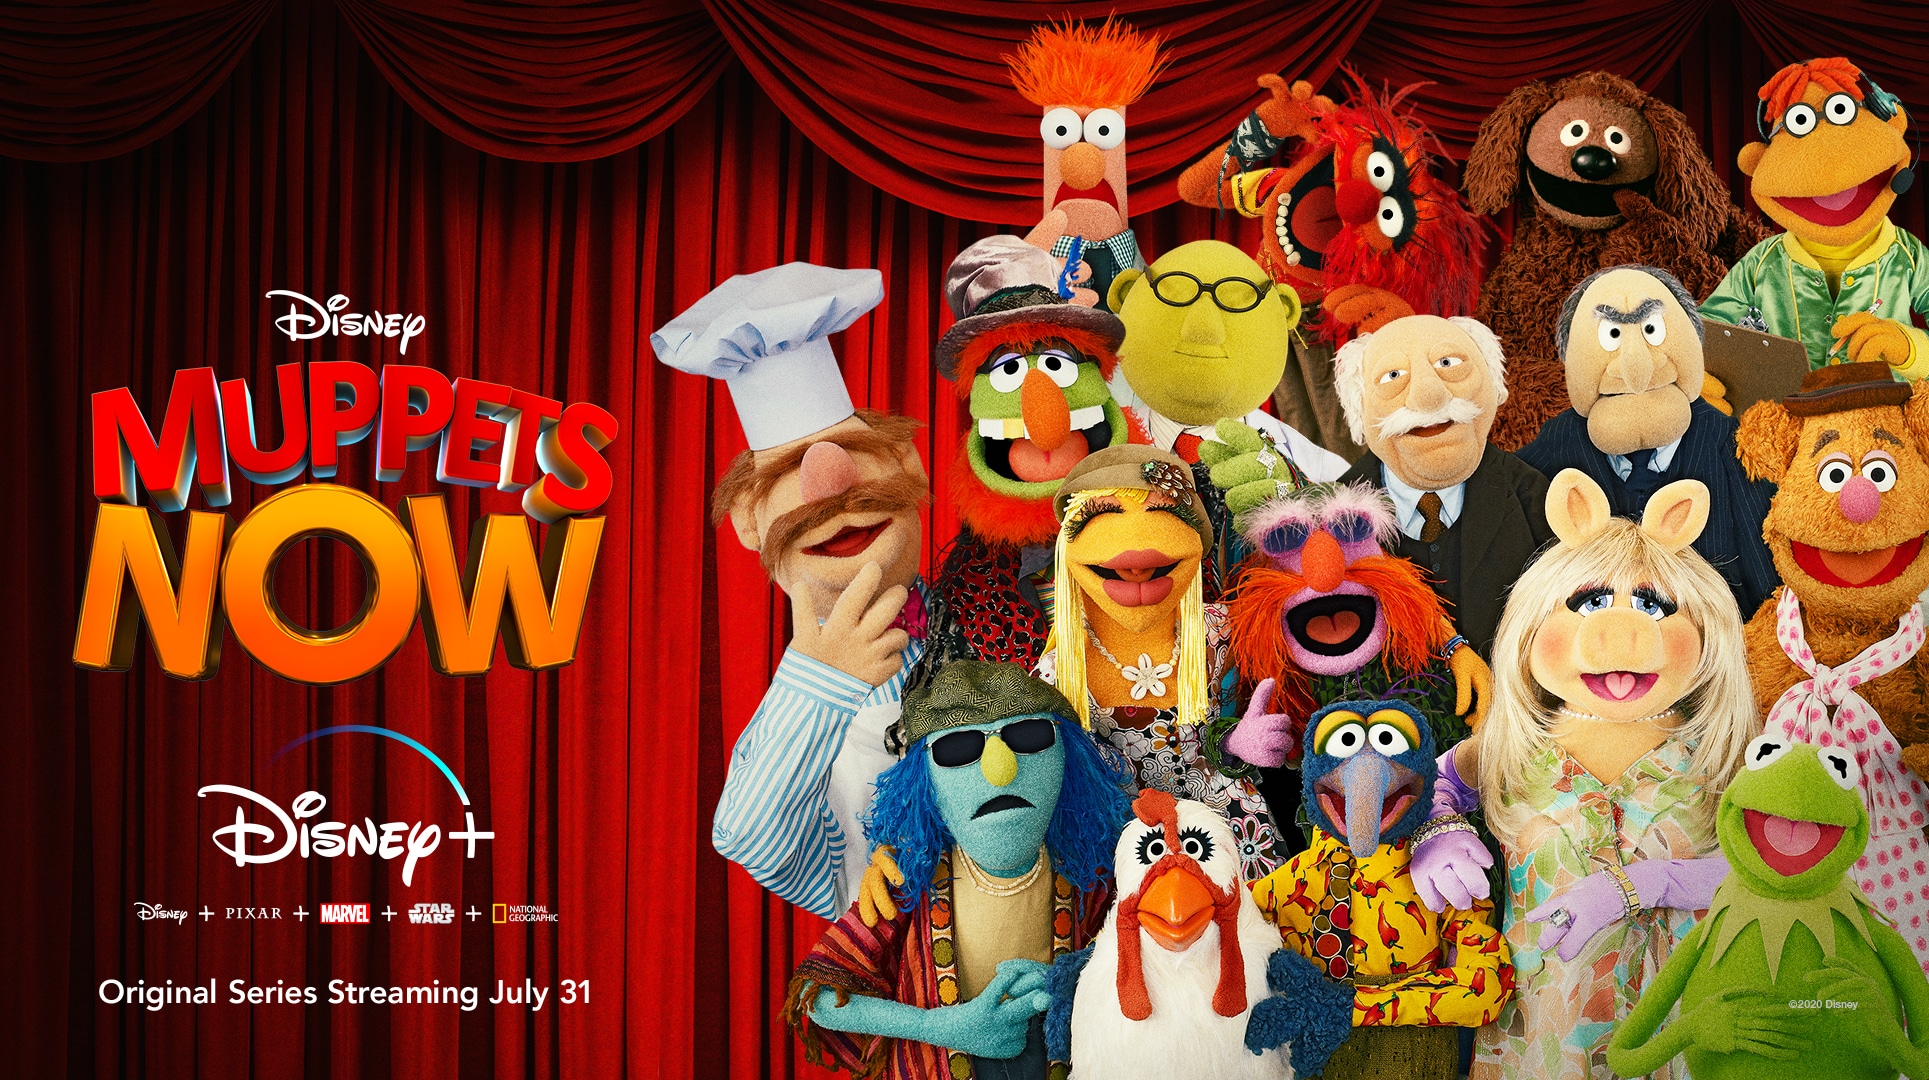 Muppets NOW! Brings the Charm and Zaniness of Muppets to Disney+